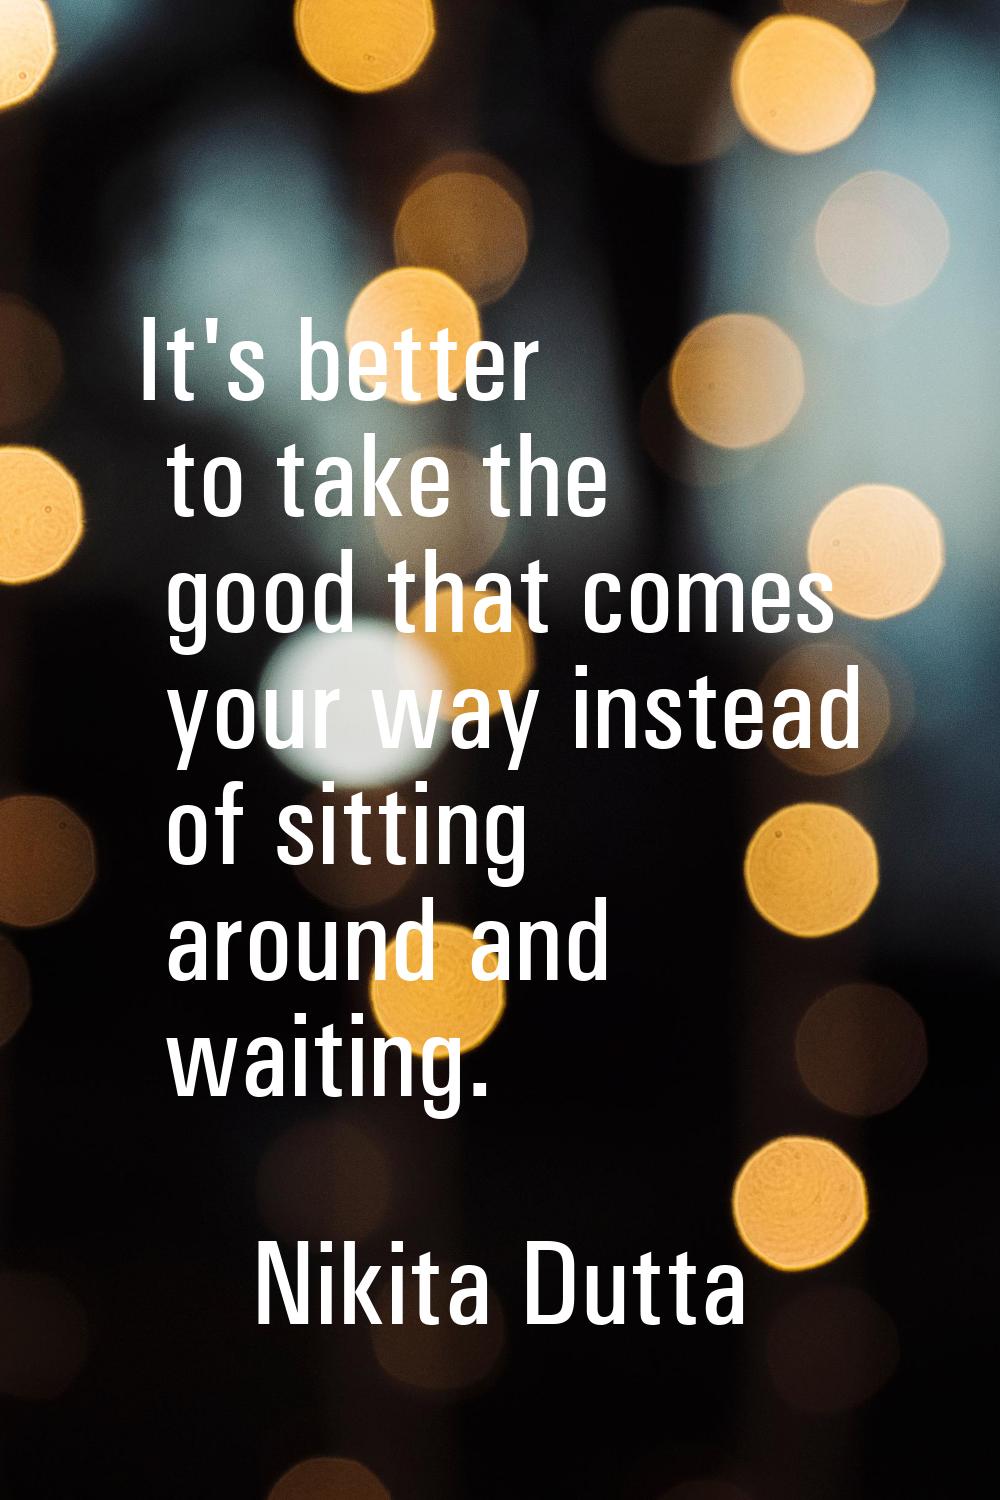 It's better to take the good that comes your way instead of sitting around and waiting.